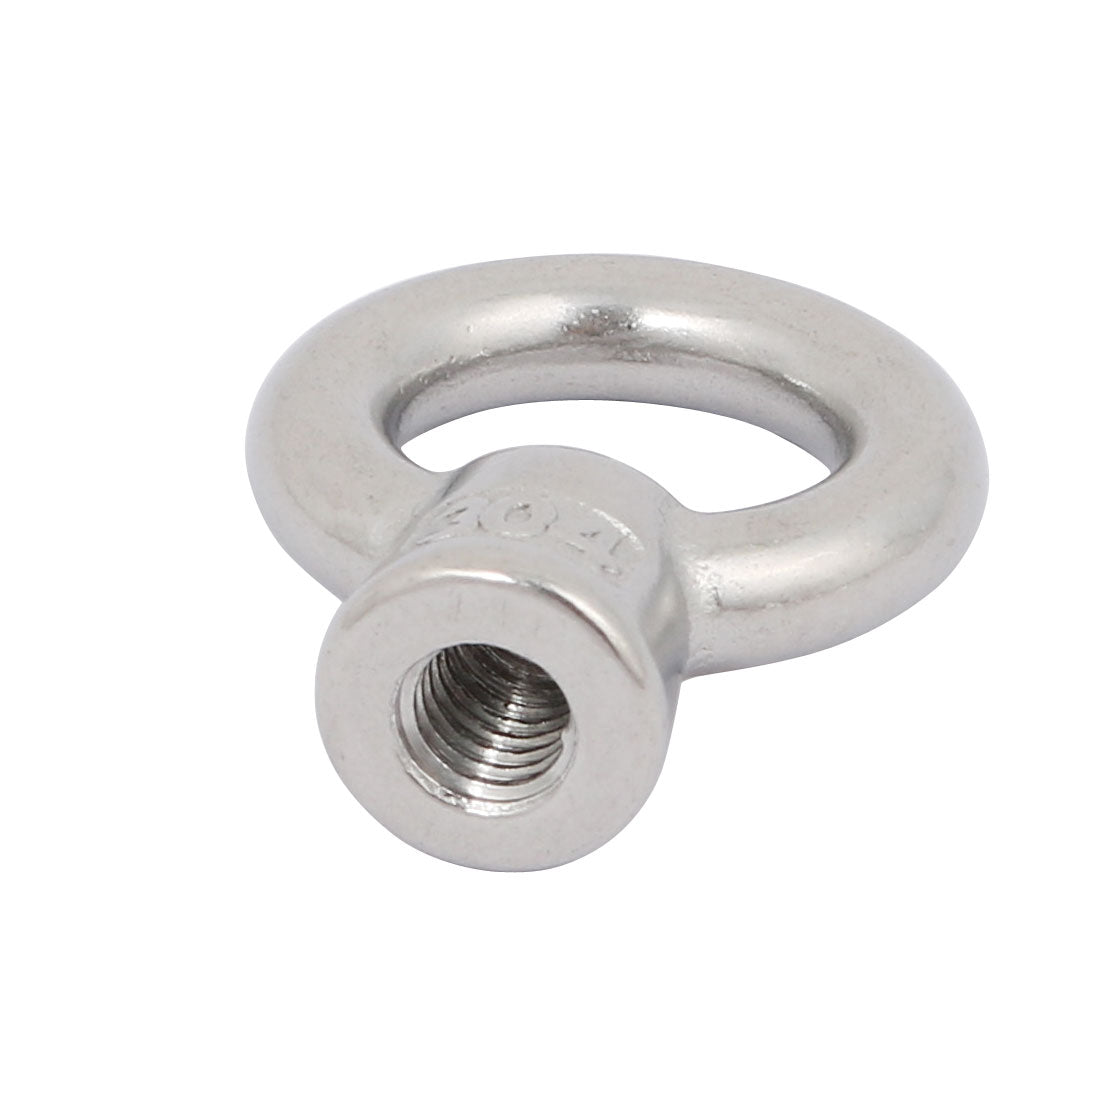 uxcell Uxcell M6 Thread 304 Stainless Steel Japanese Style Ring Shaped Lifting Eye Nut 5pcs